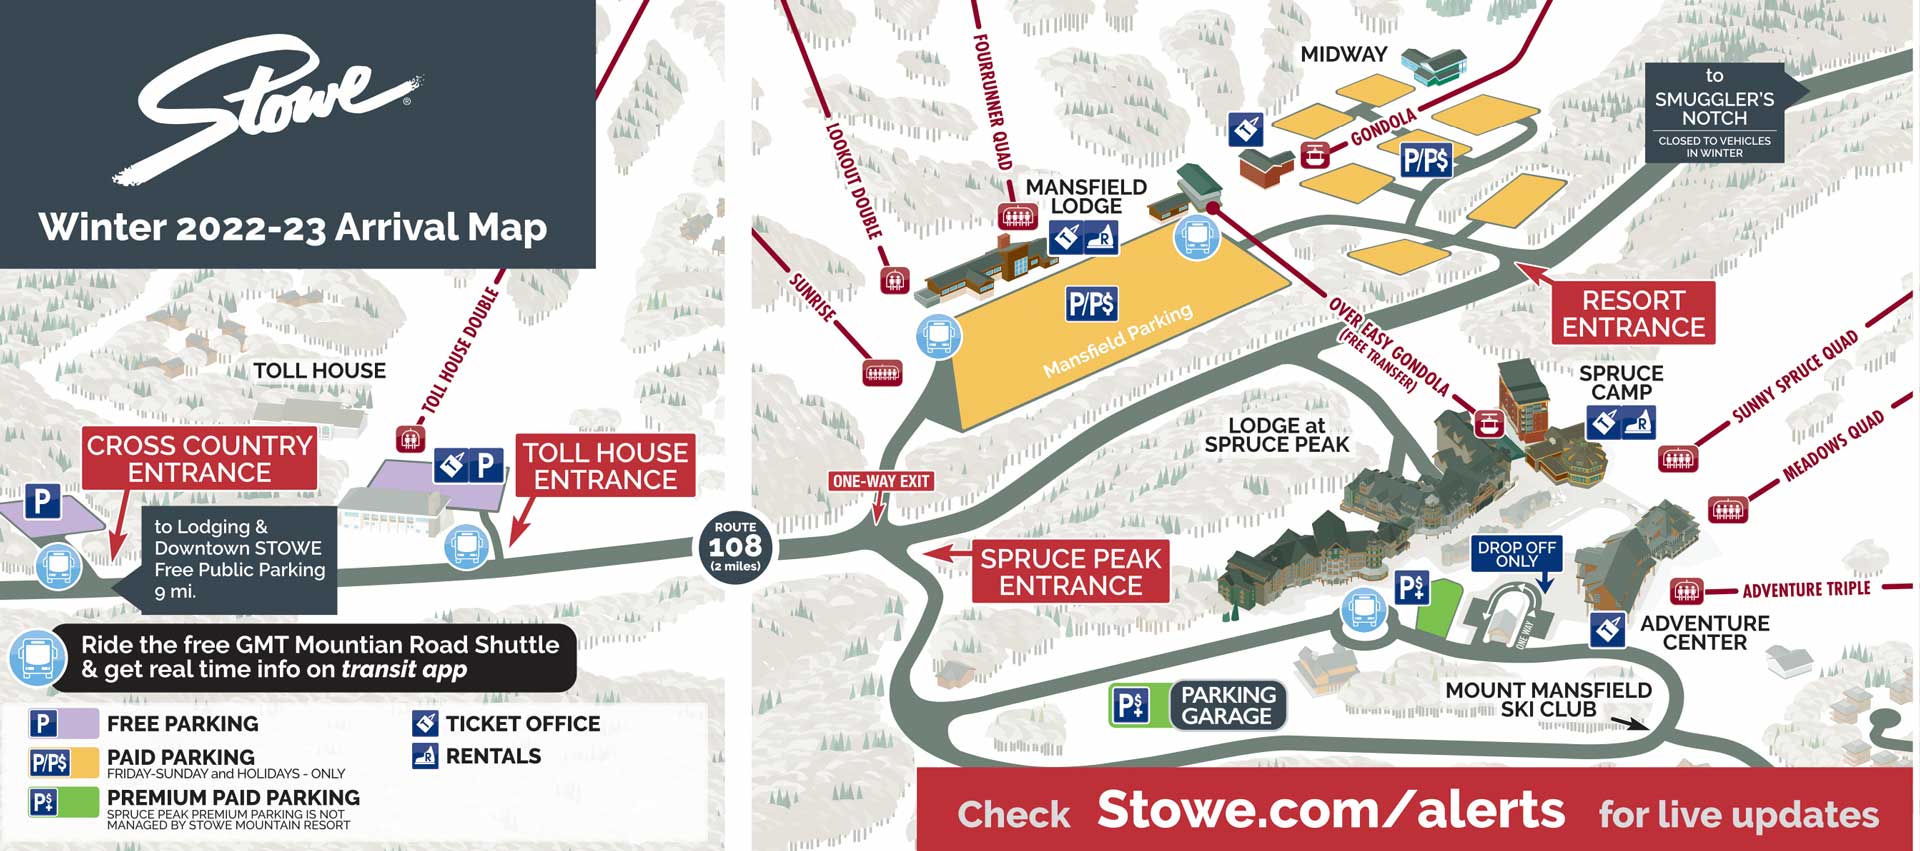 Stowe Winter 22-23 Arrival Map